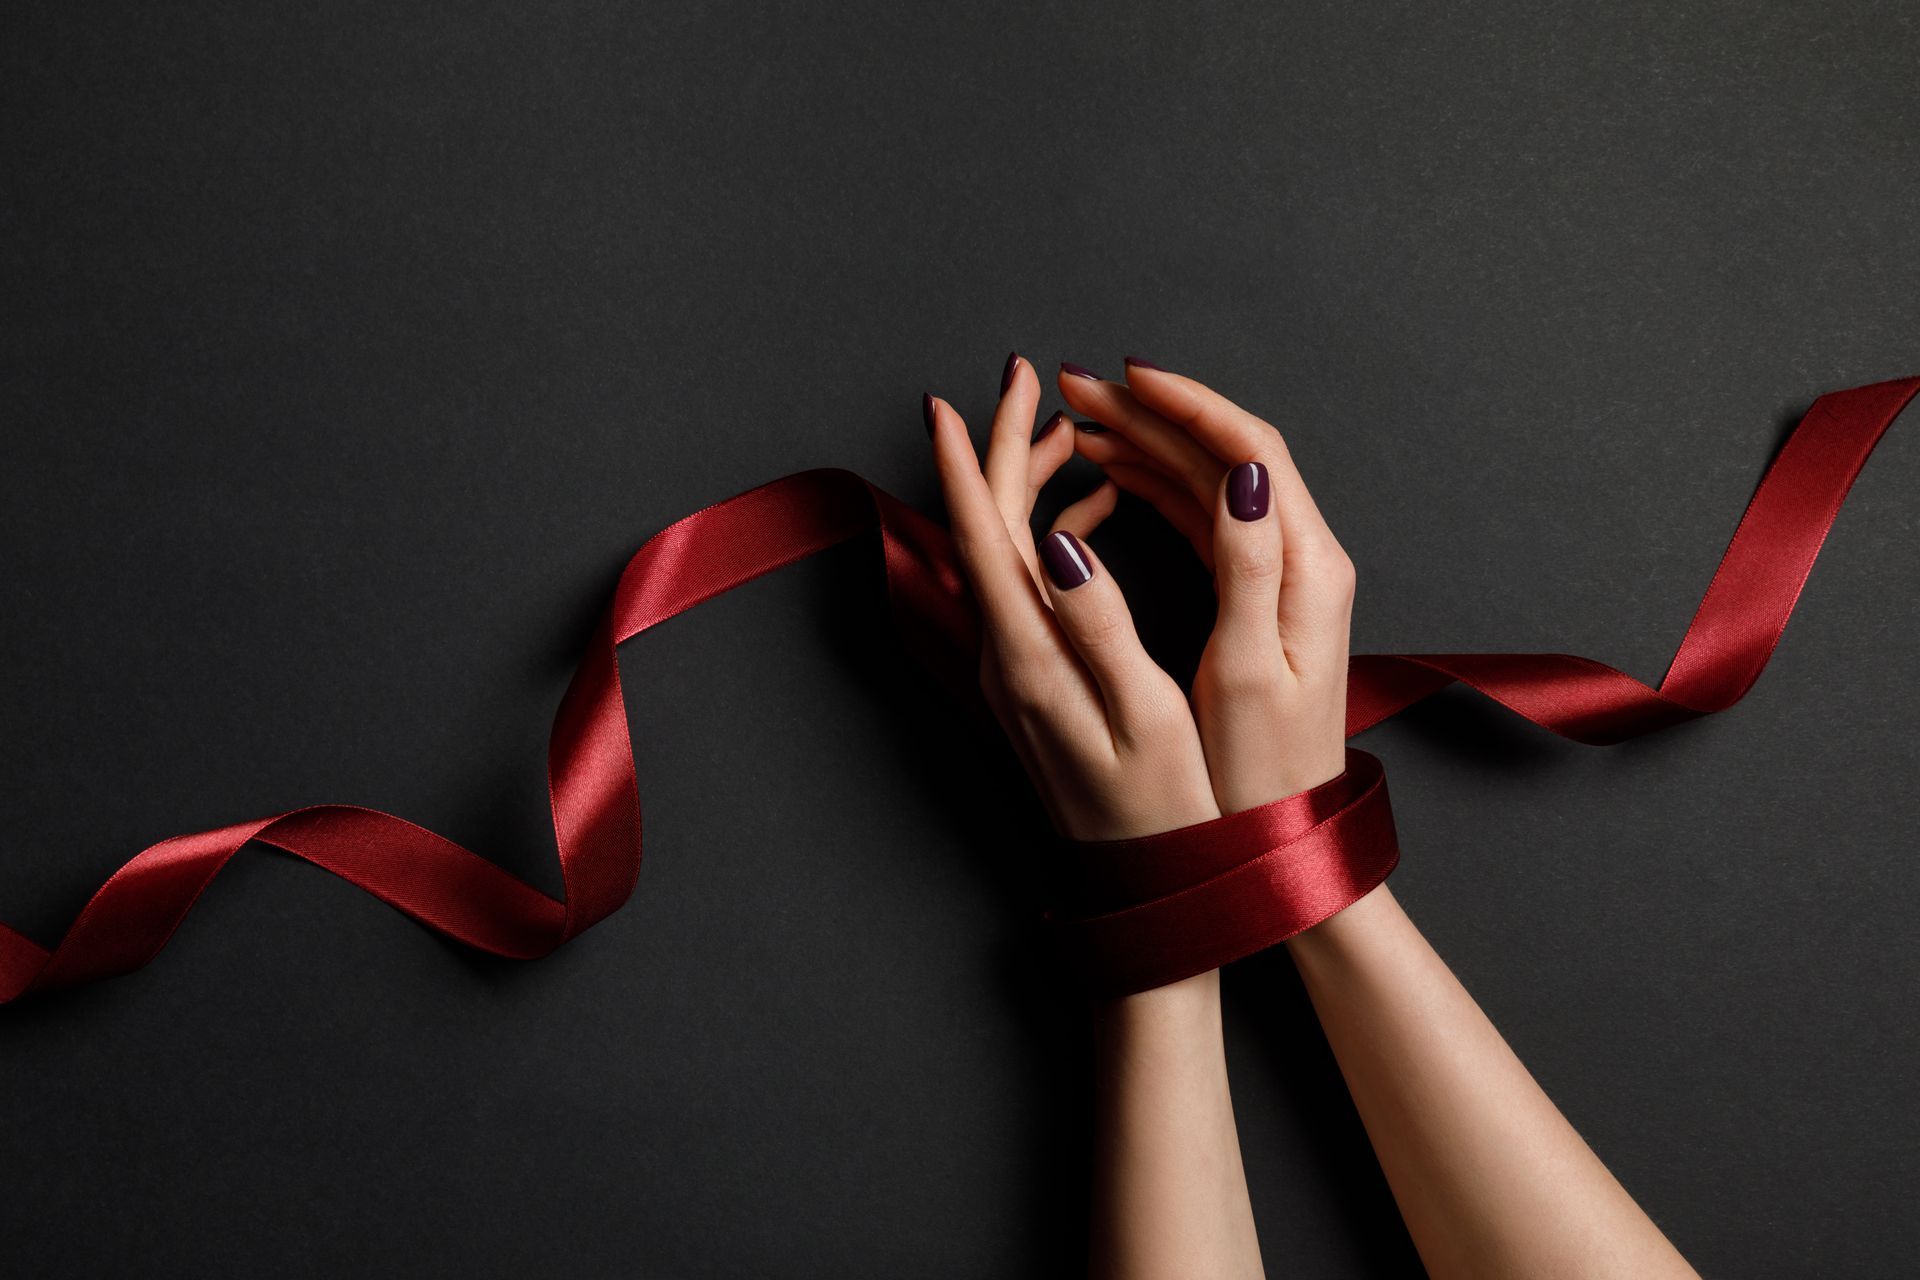 A woman 's hands are tied with a red ribbon on a black background.